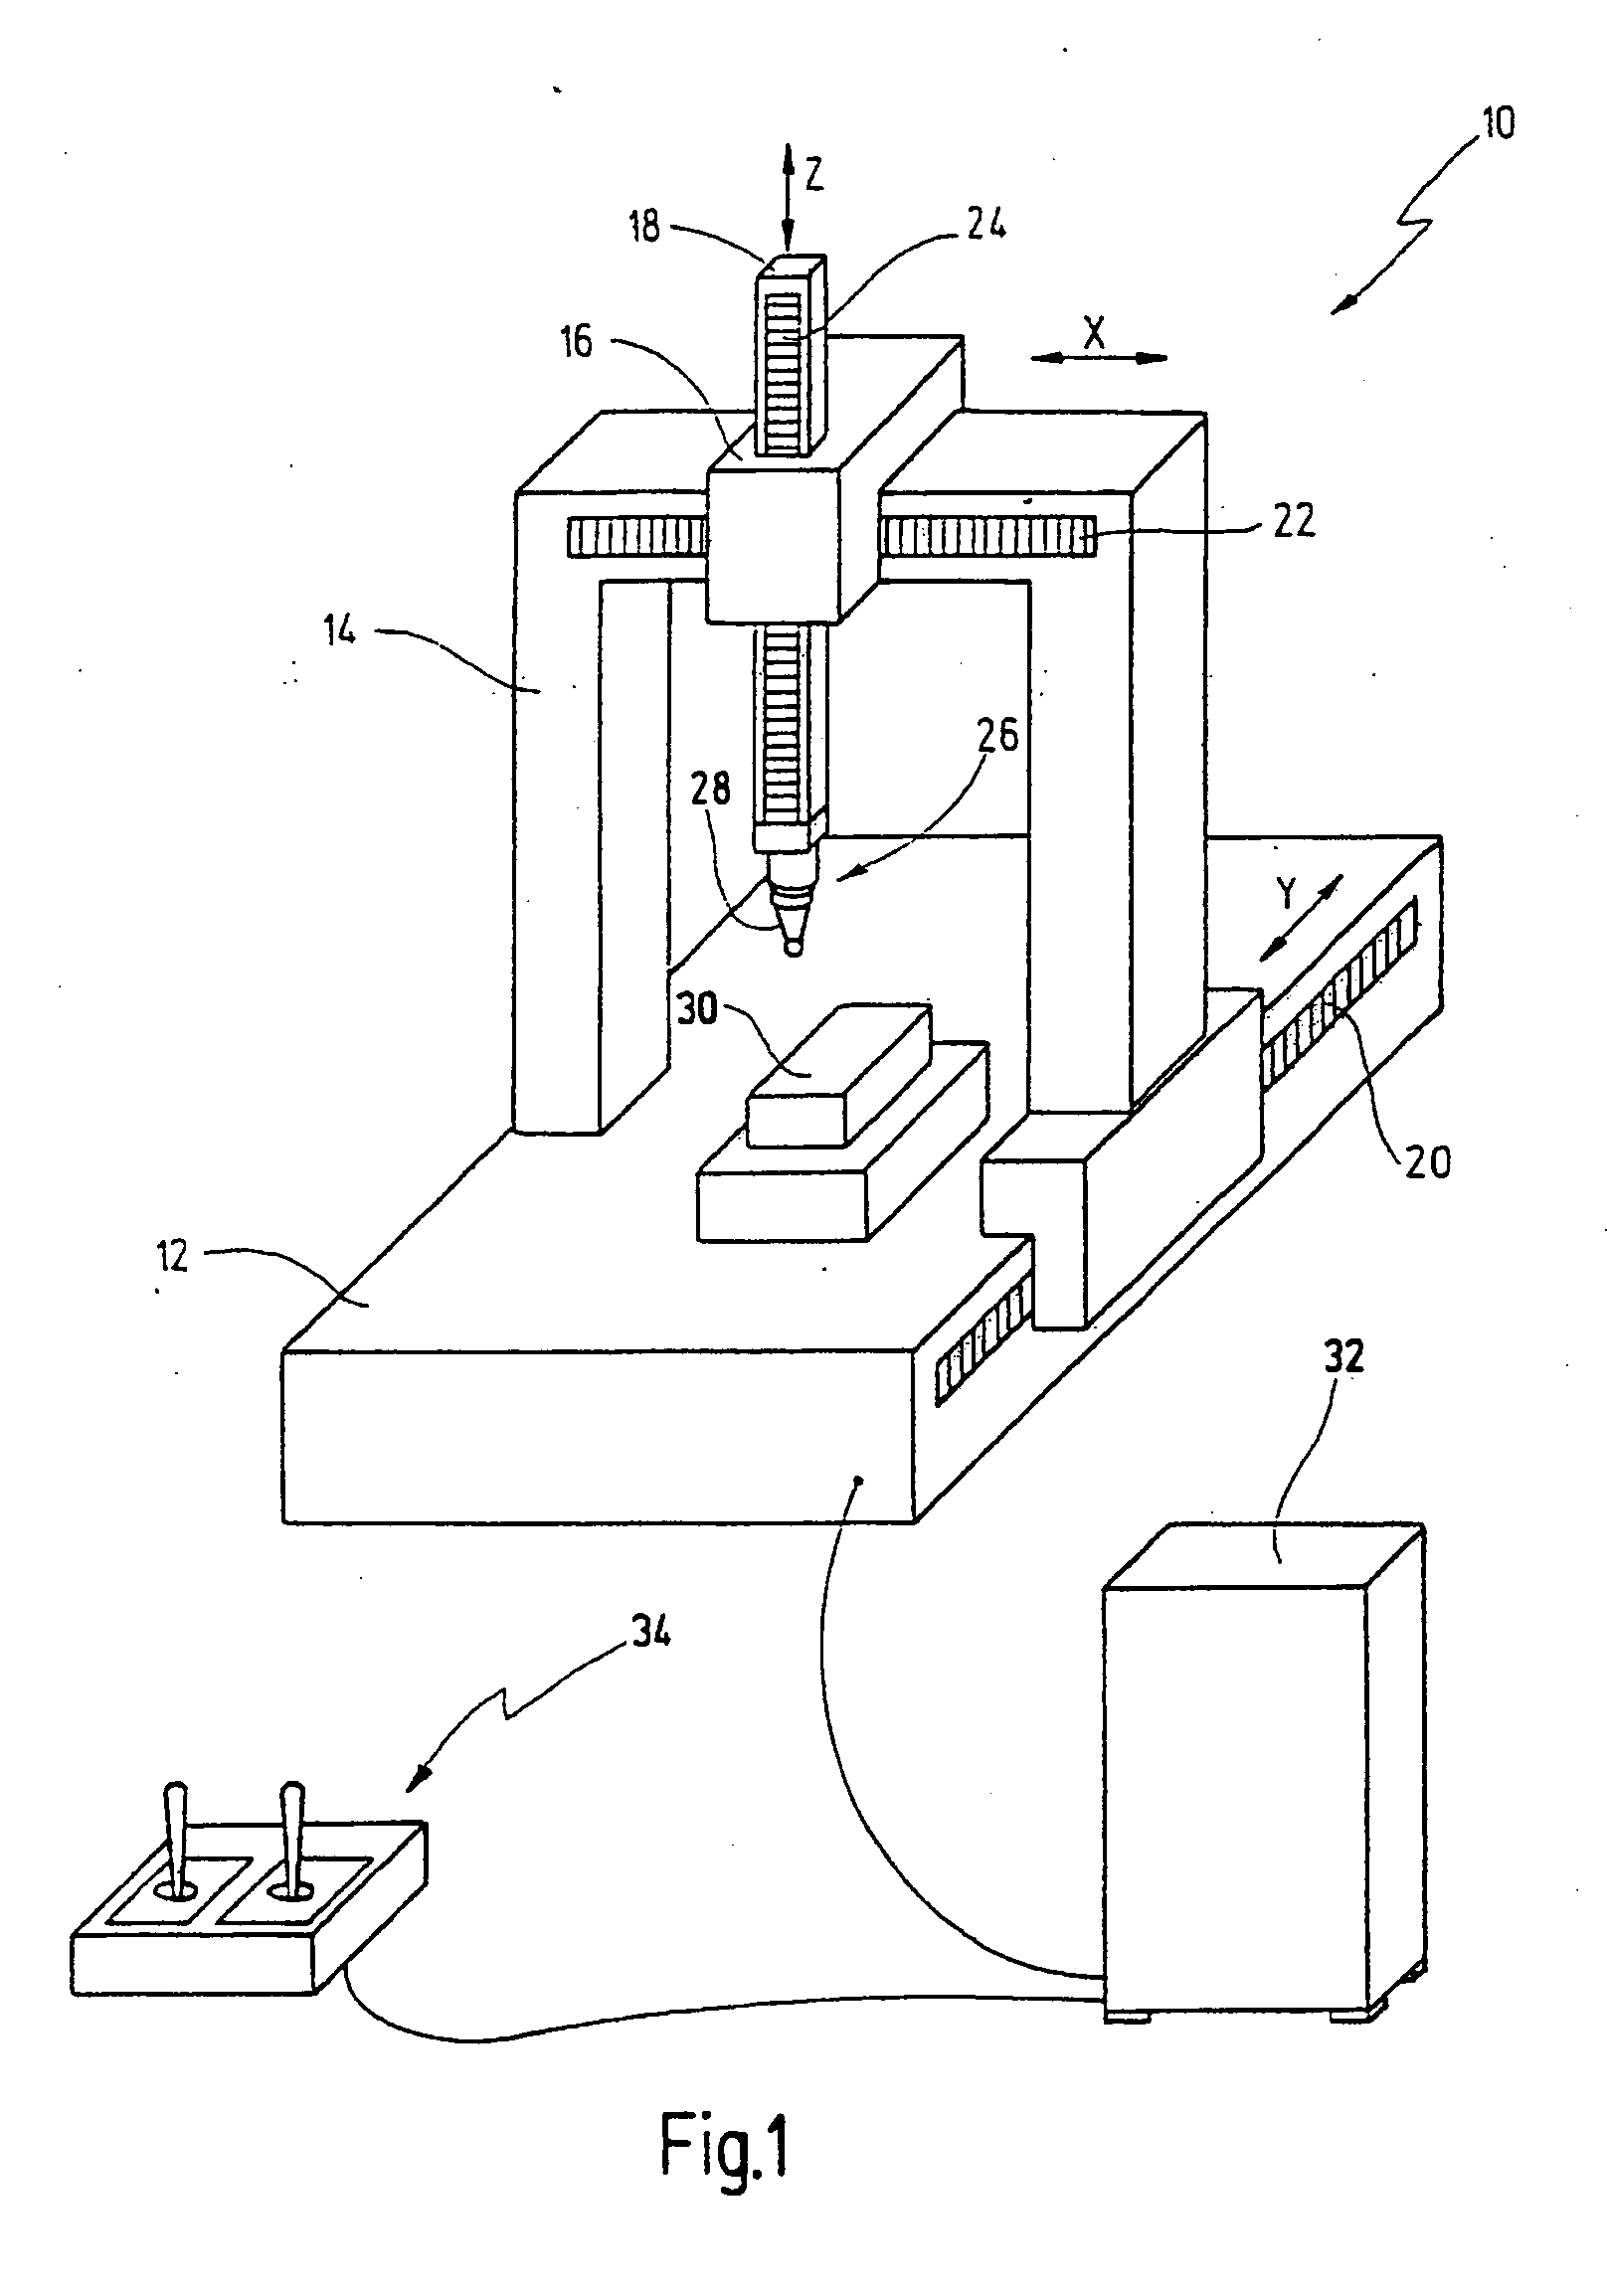 Probe for a coordinate measuring machine